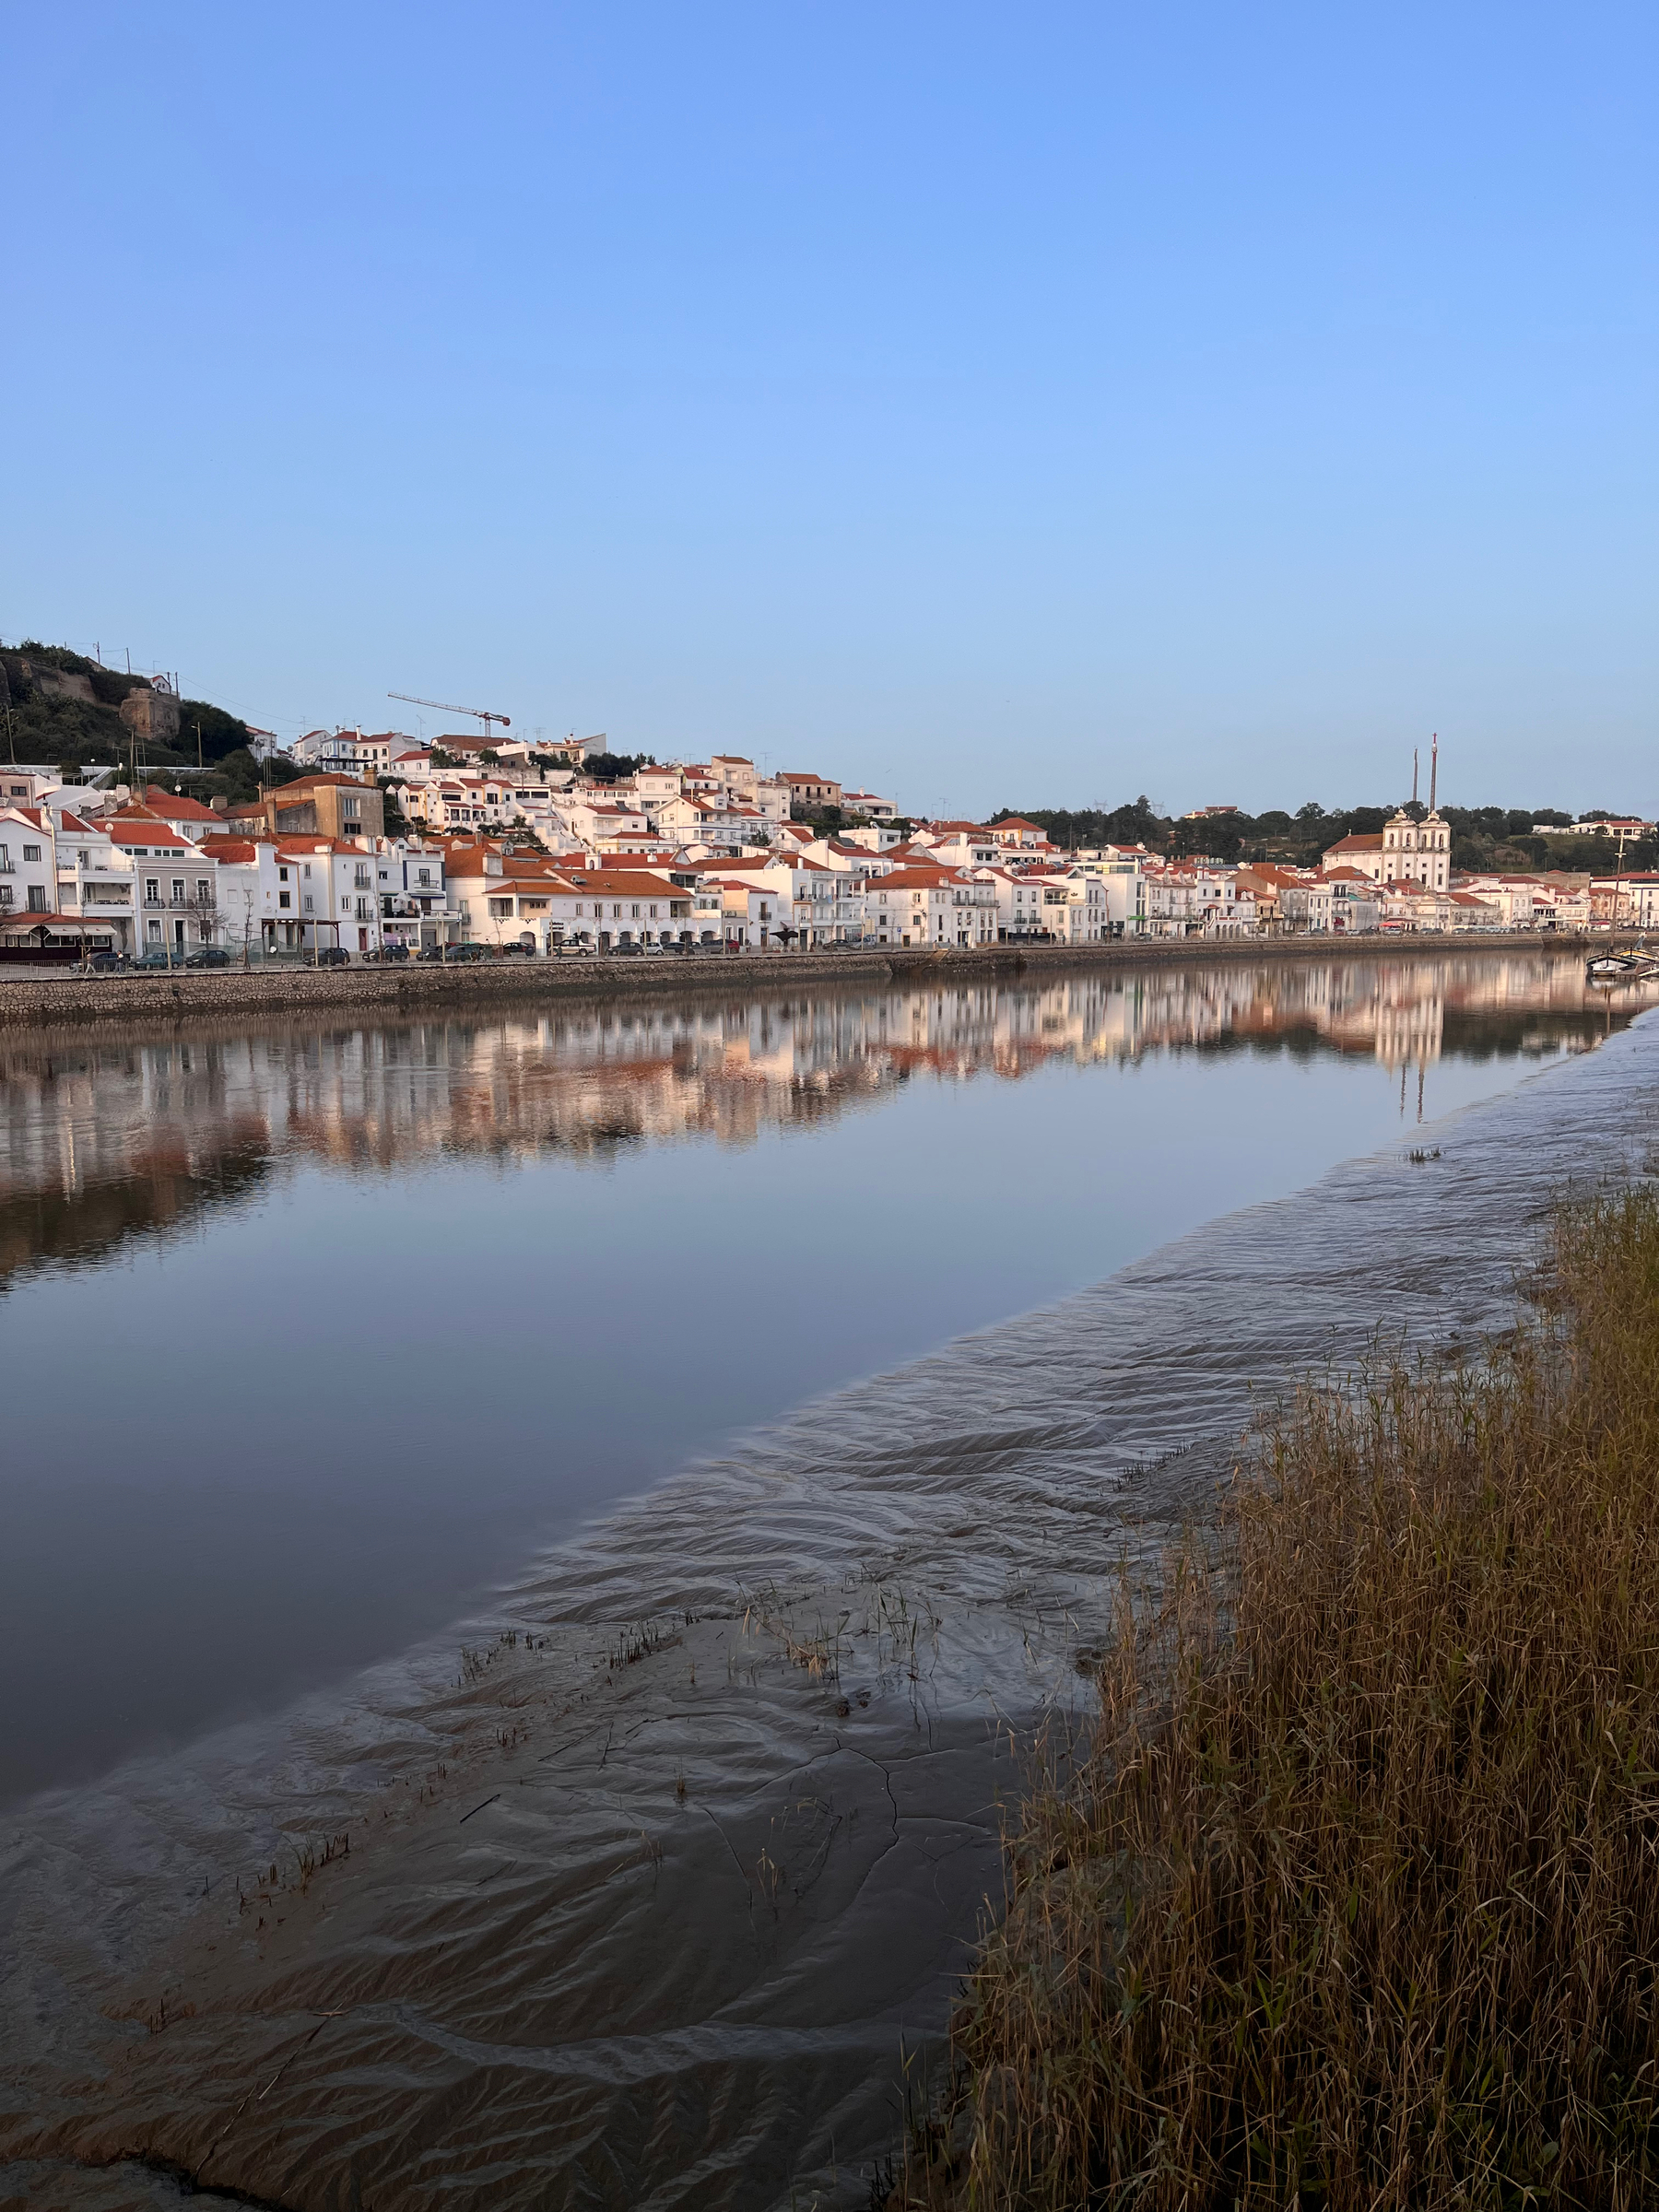 Alcácer do Sal, Portugal, from over the River Sado. The river is so still that the town is reflected in the river.